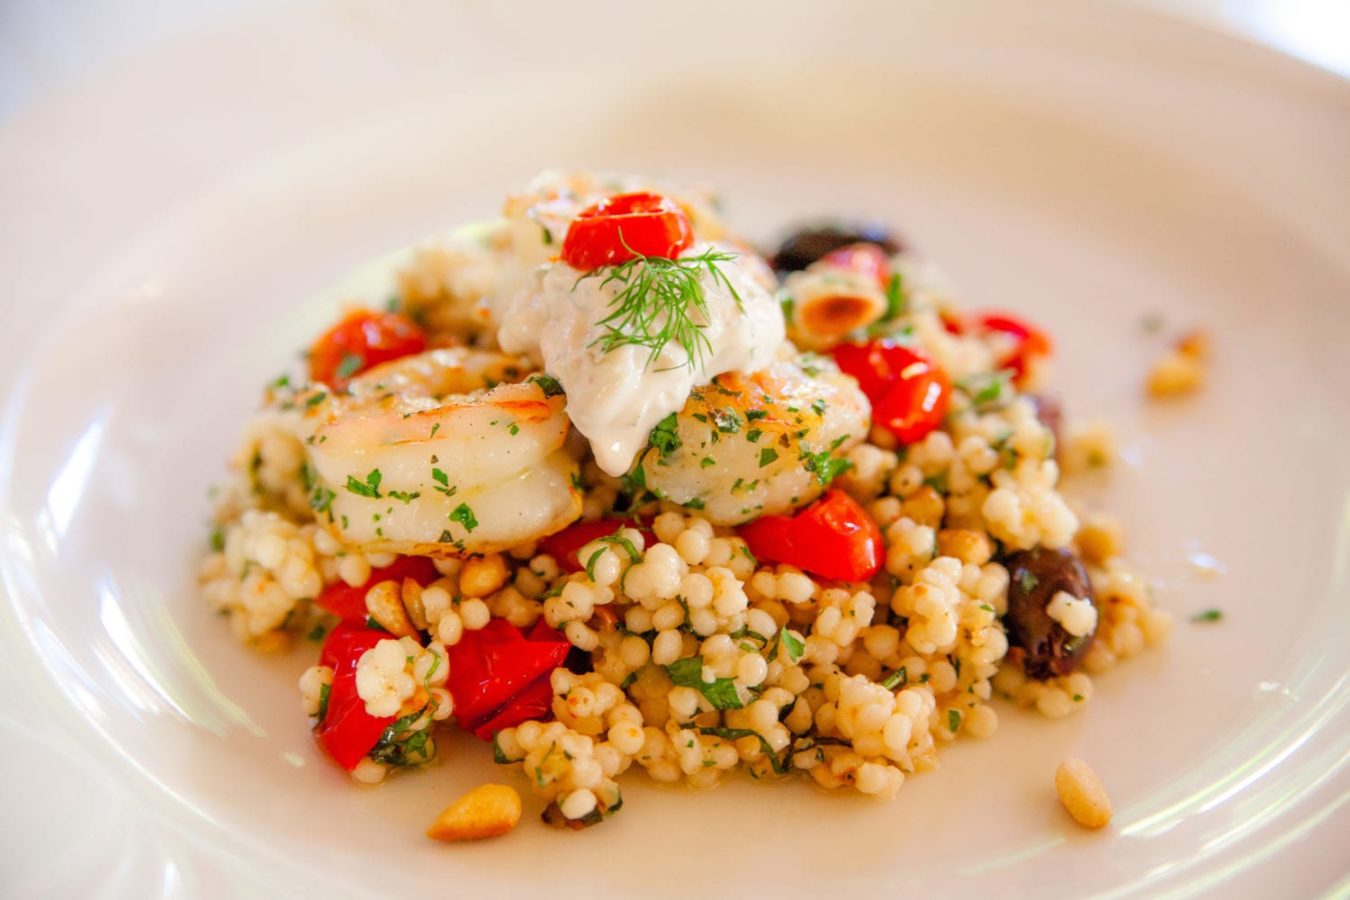 Herbed Shrimp Salad with Israeli Couscous